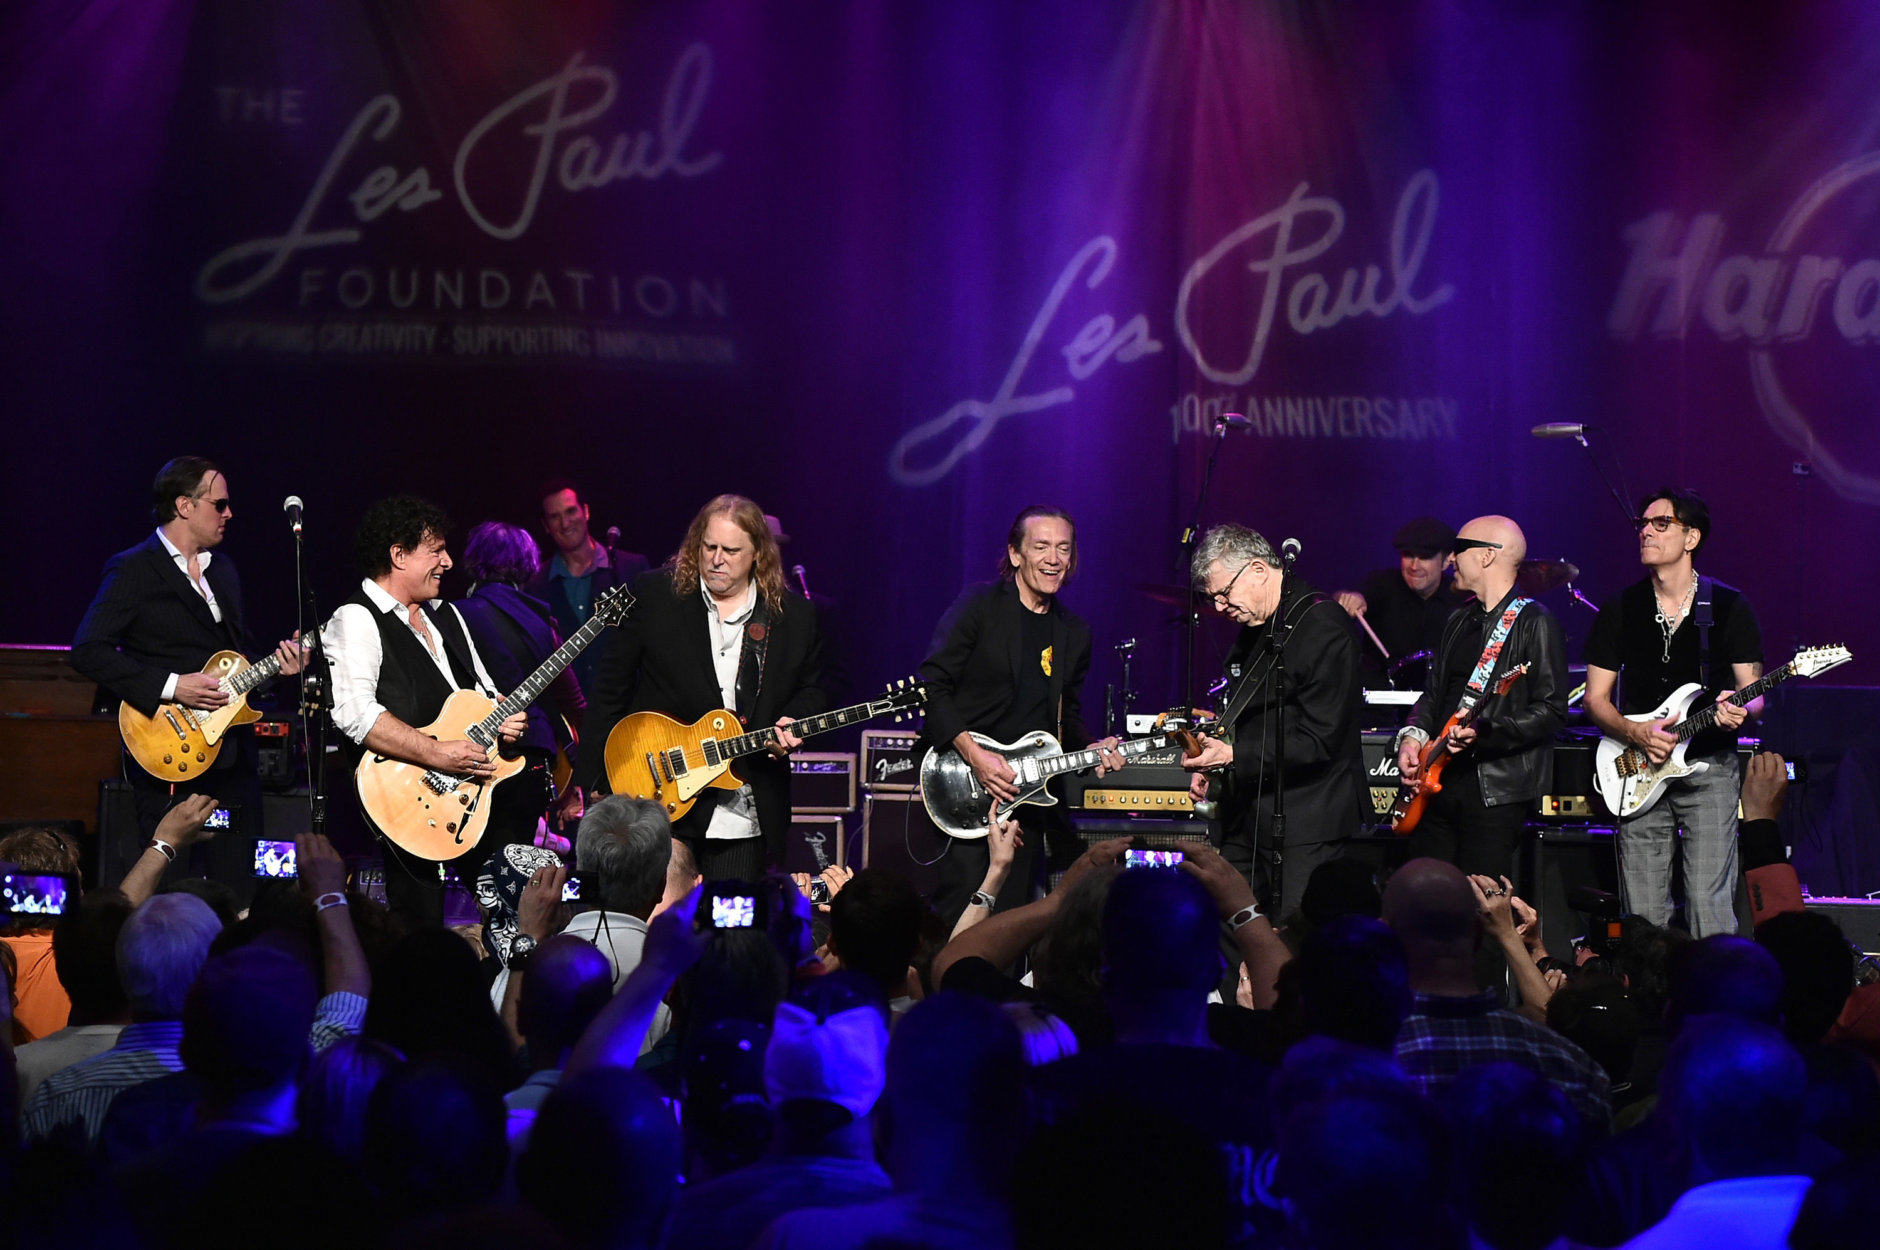 NEW YORK, NY - JUNE 09:  Jon Bonamasso, Neal Schon, Warren Haynes, G E Smith, Steve Miller, Joe Satriani and Steve Vai perform on stage at the Les Paul 100th Anniversary Celebration on June 9, 2015 in New York City.  (Photo by Theo Wargo/Getty Images for Les Paul Foundation)